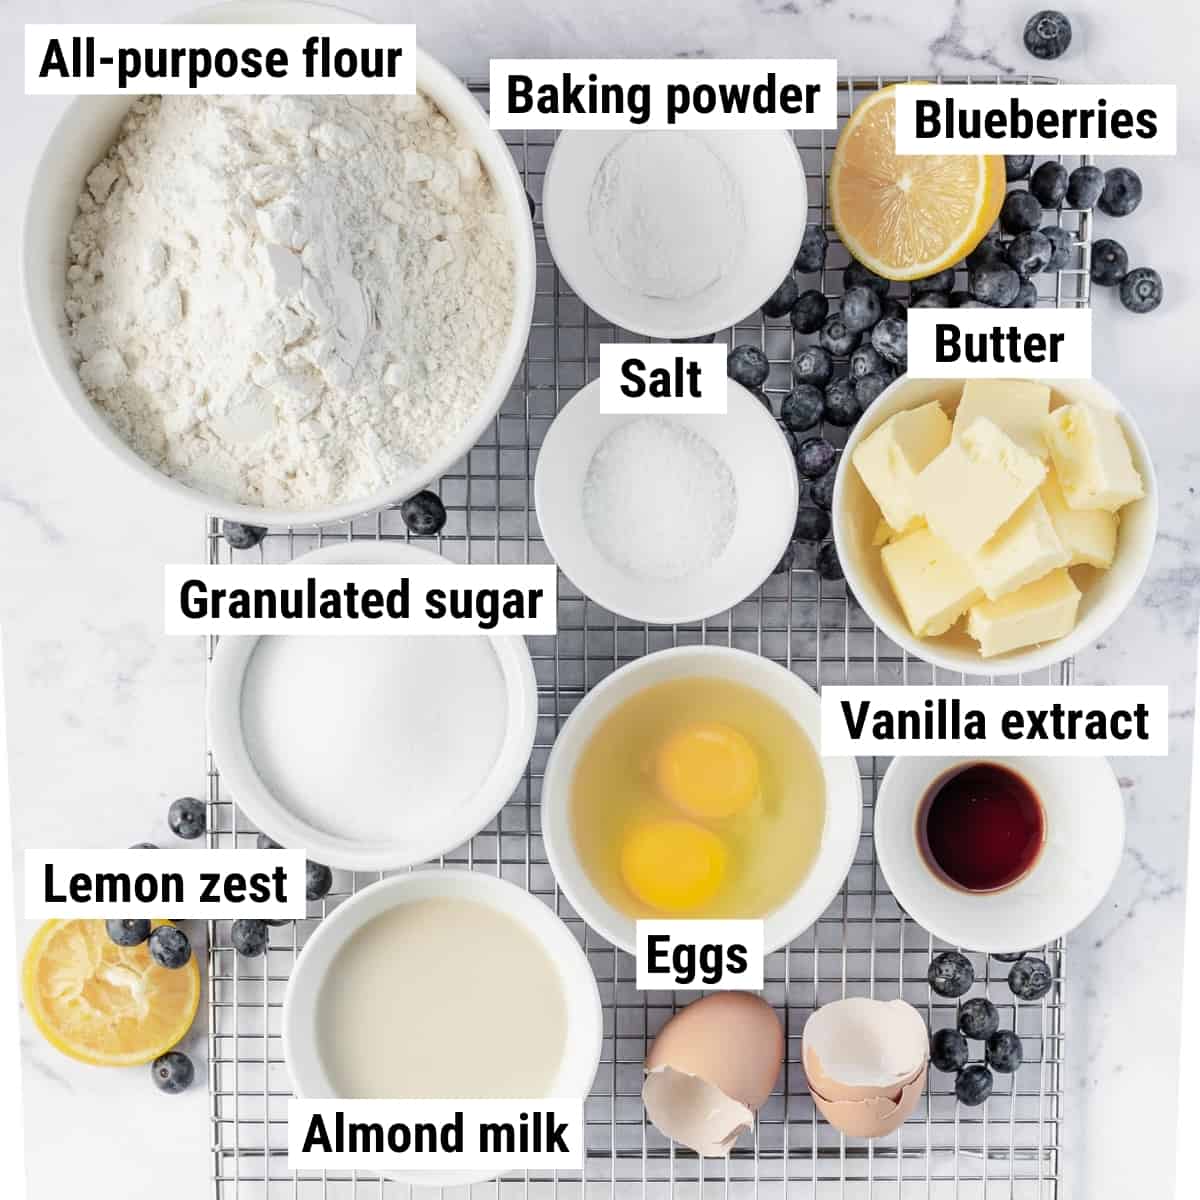 The ingredients to make lemon blueberry cookies.